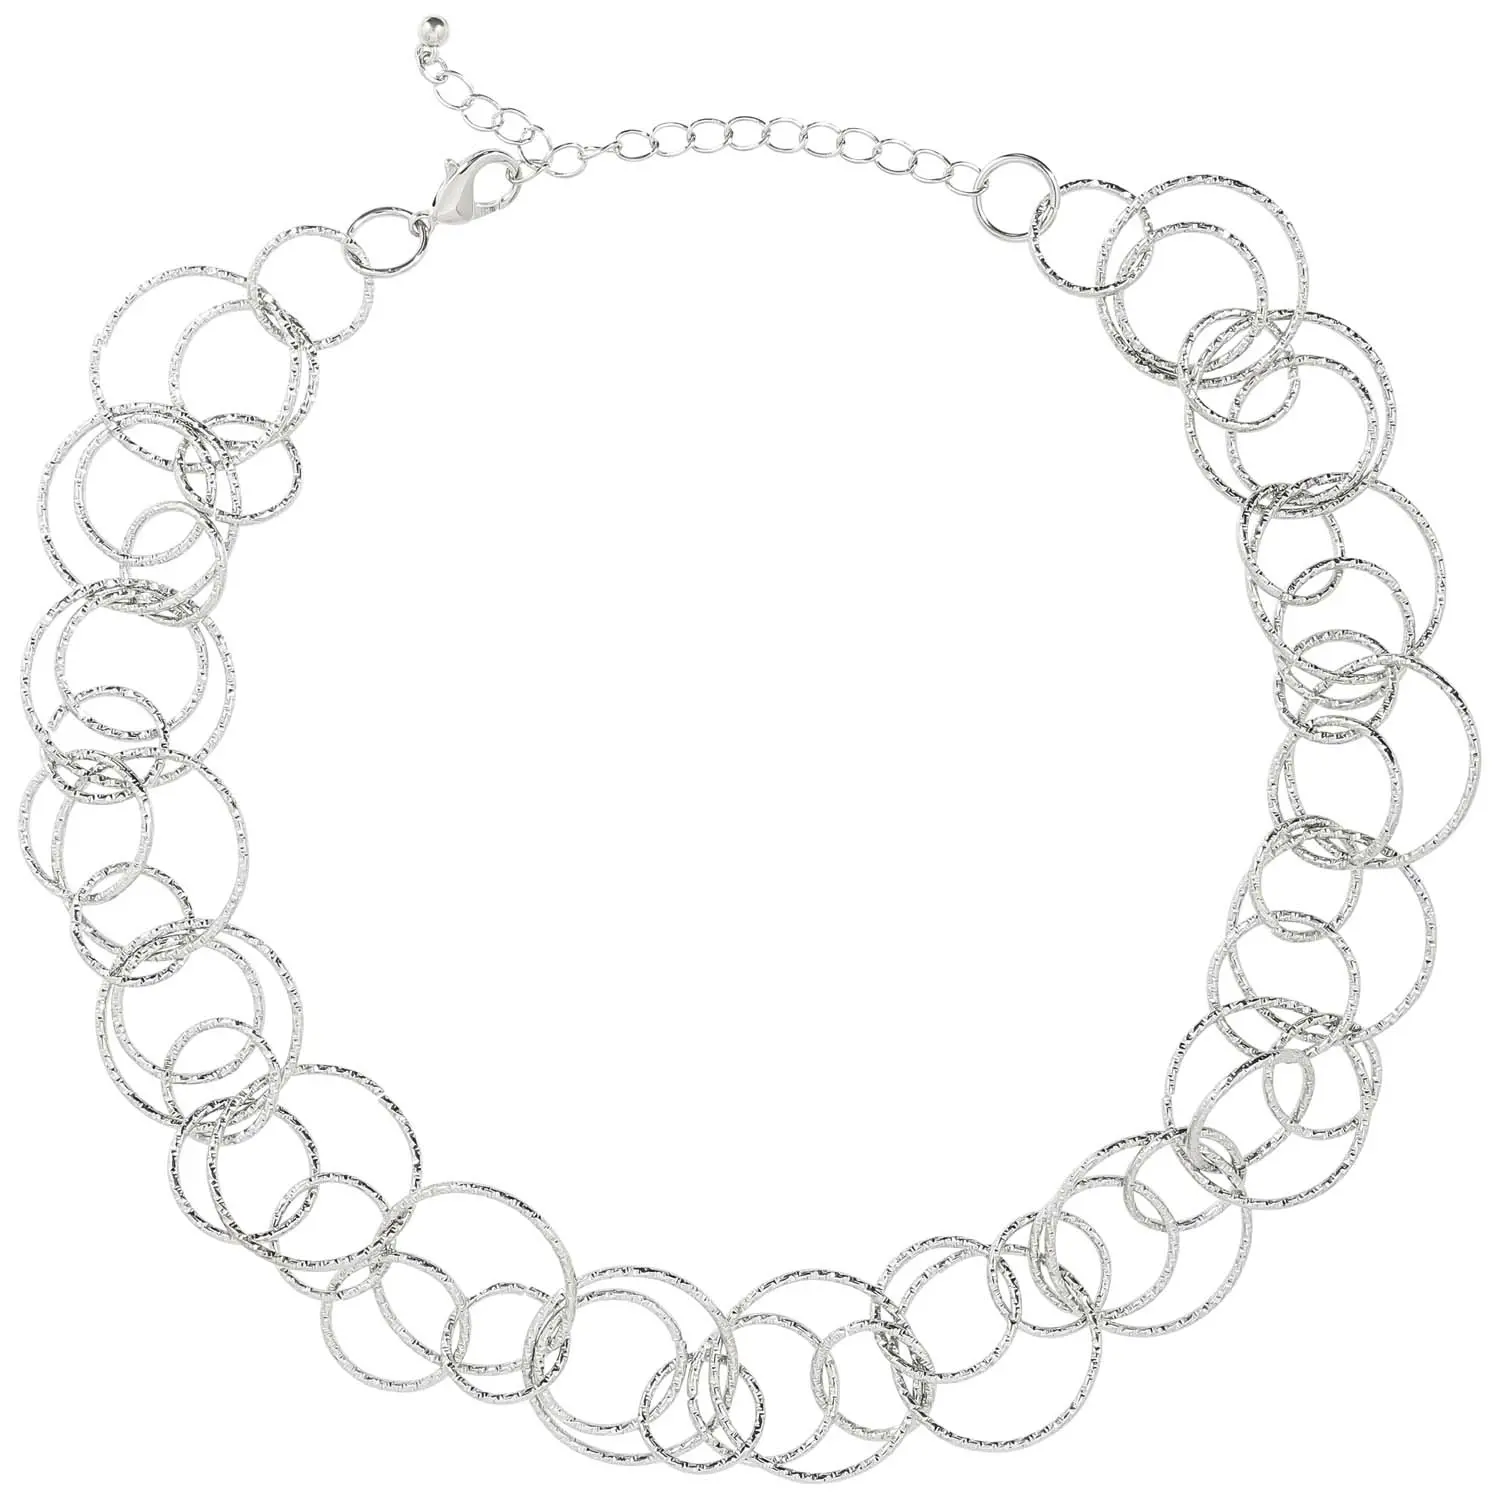 Collier - Connected Circles